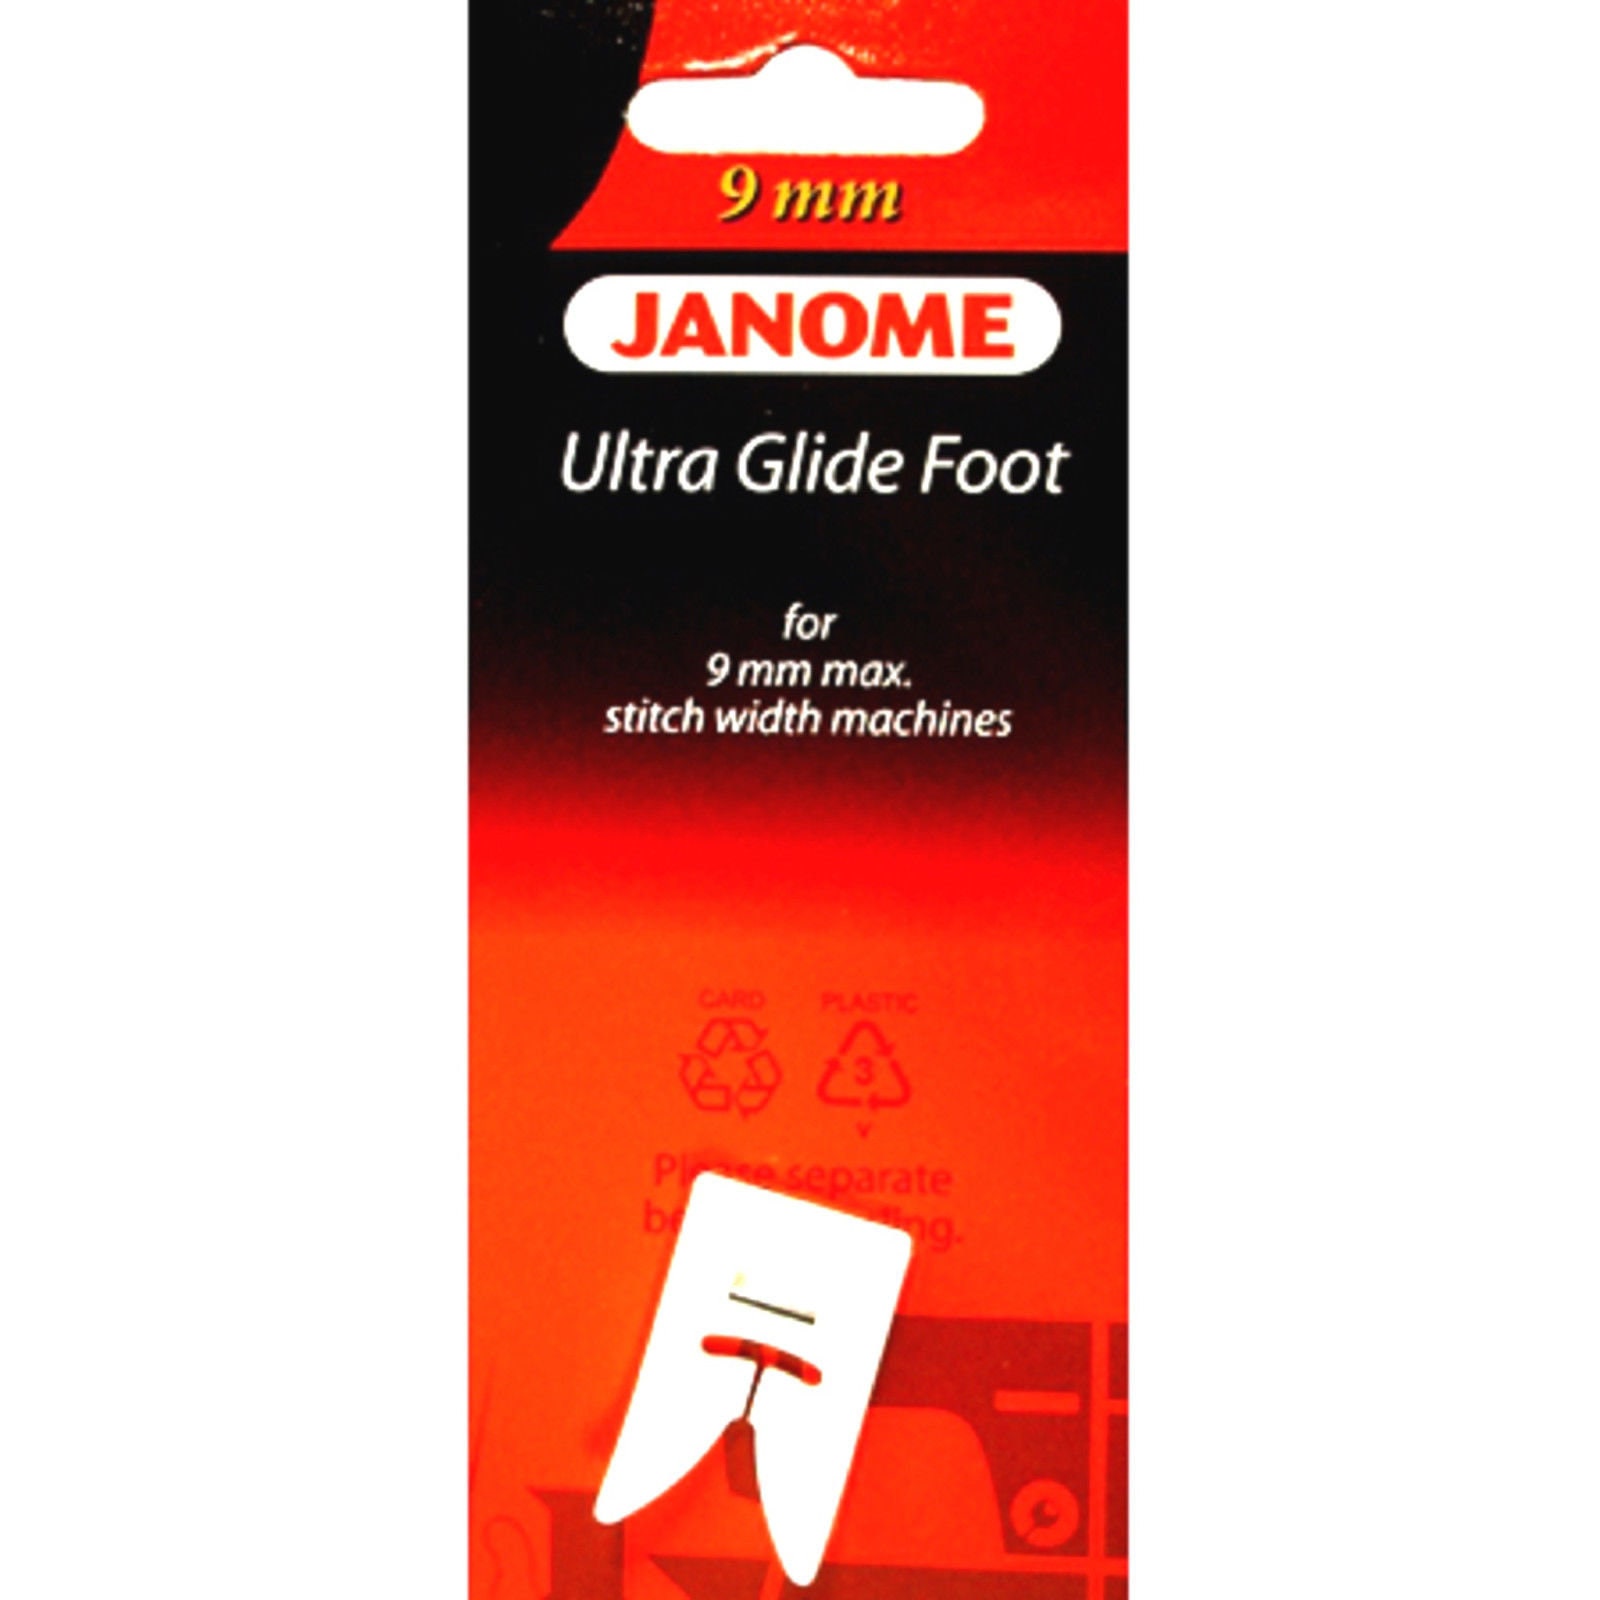 Janome Ultra Glide Foot for 9mm Max Stitch Width Machines #202091000 #T5765 YS 